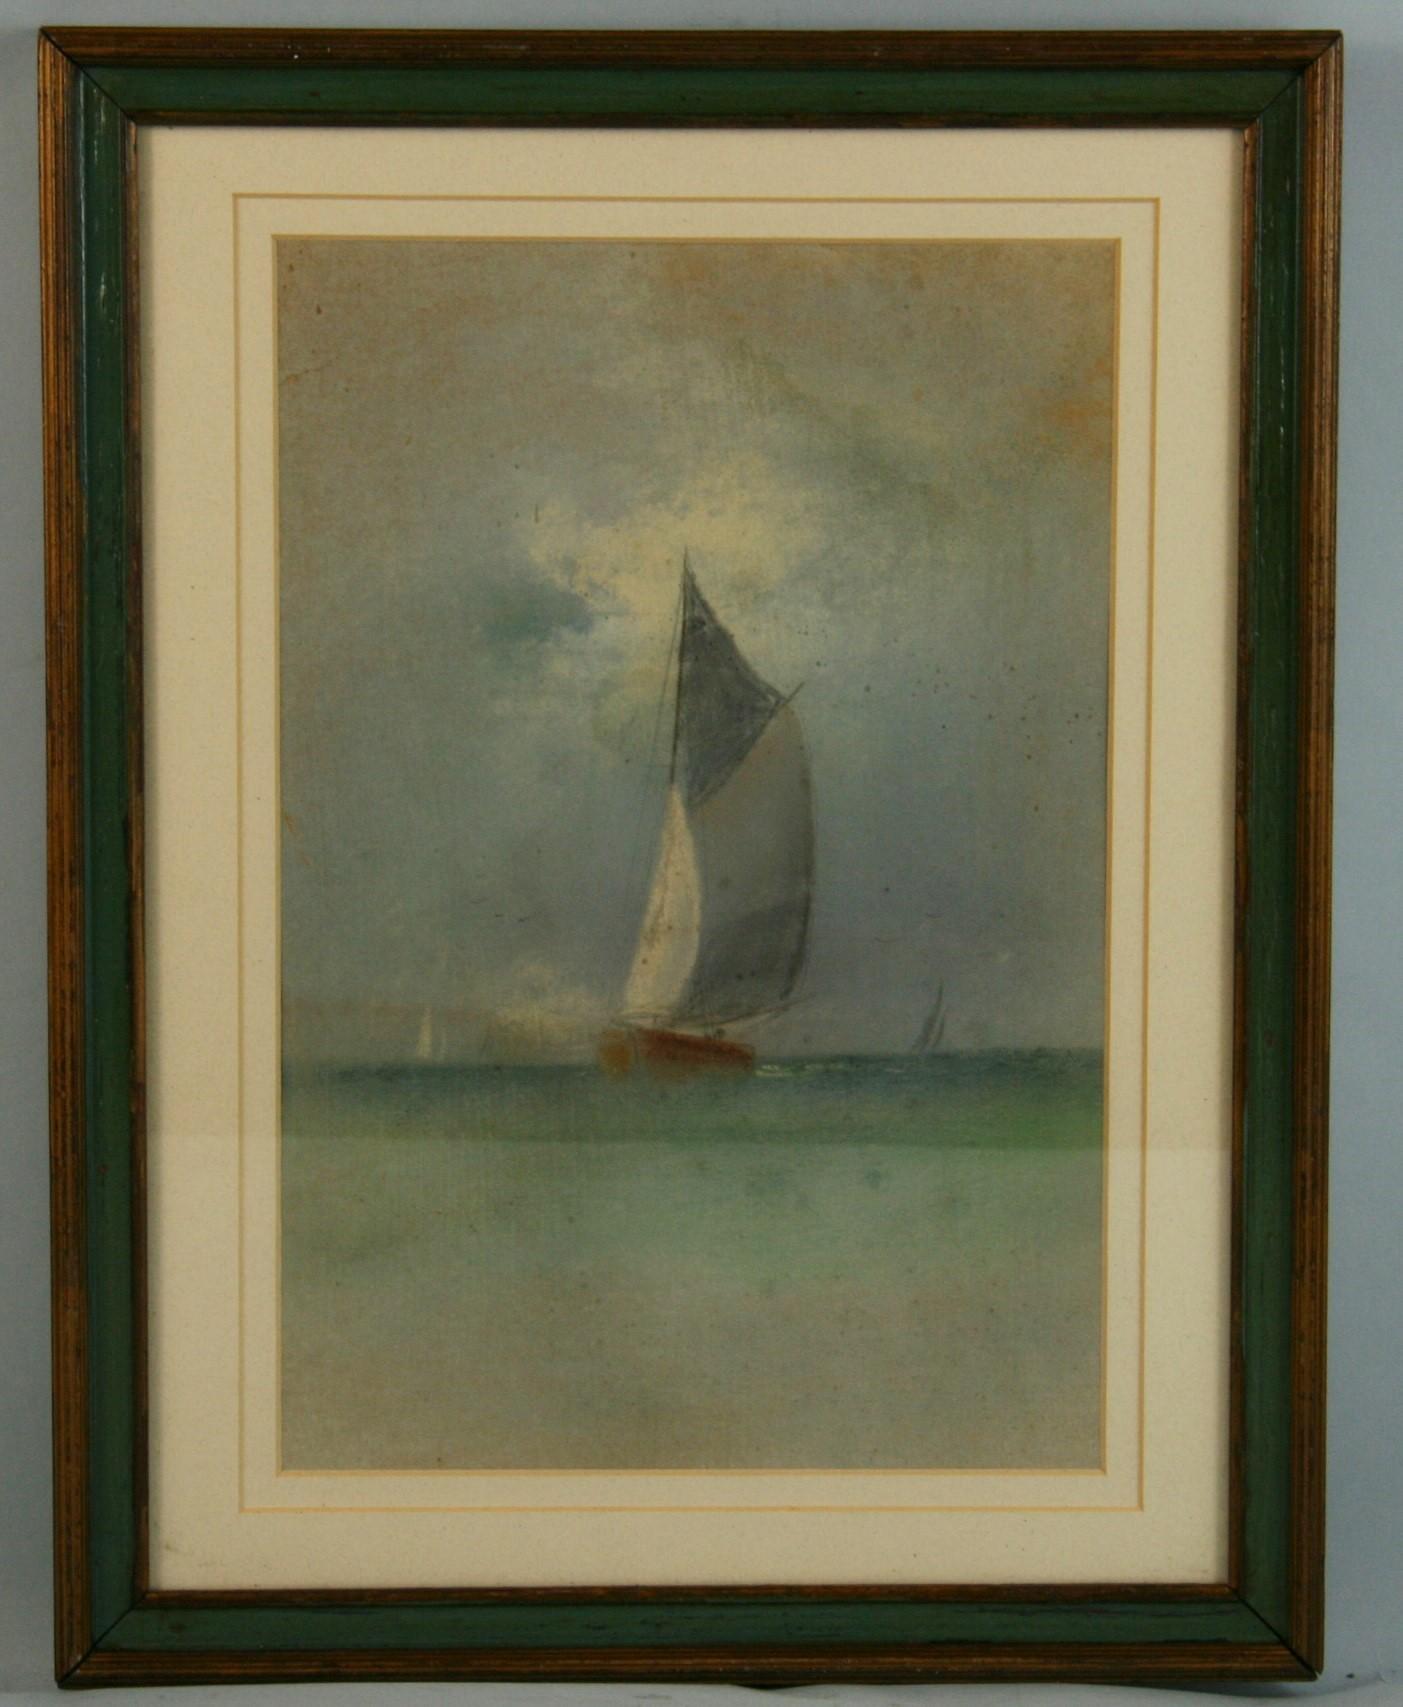  Sailing Regatta Antique Oil Pastel 1900 - Painting by Unknown